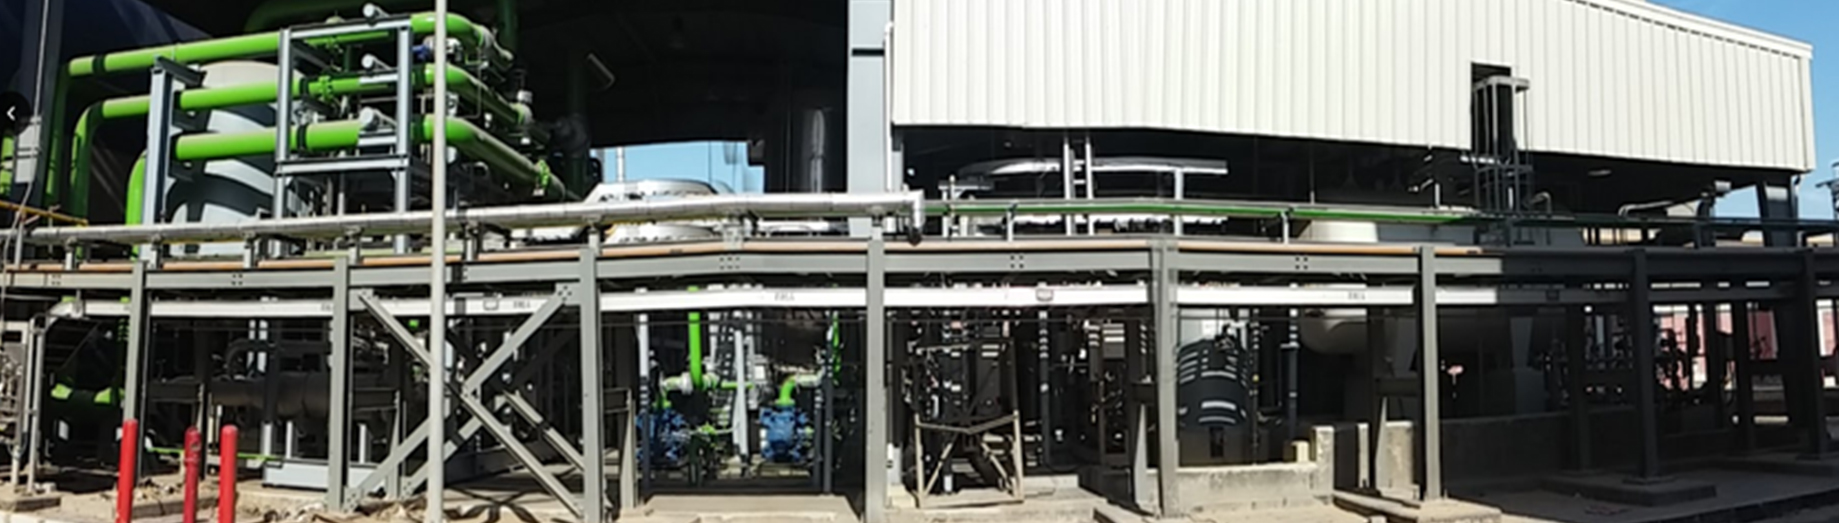 Condensate Polisher Plant for Suez Thermal Power Plant